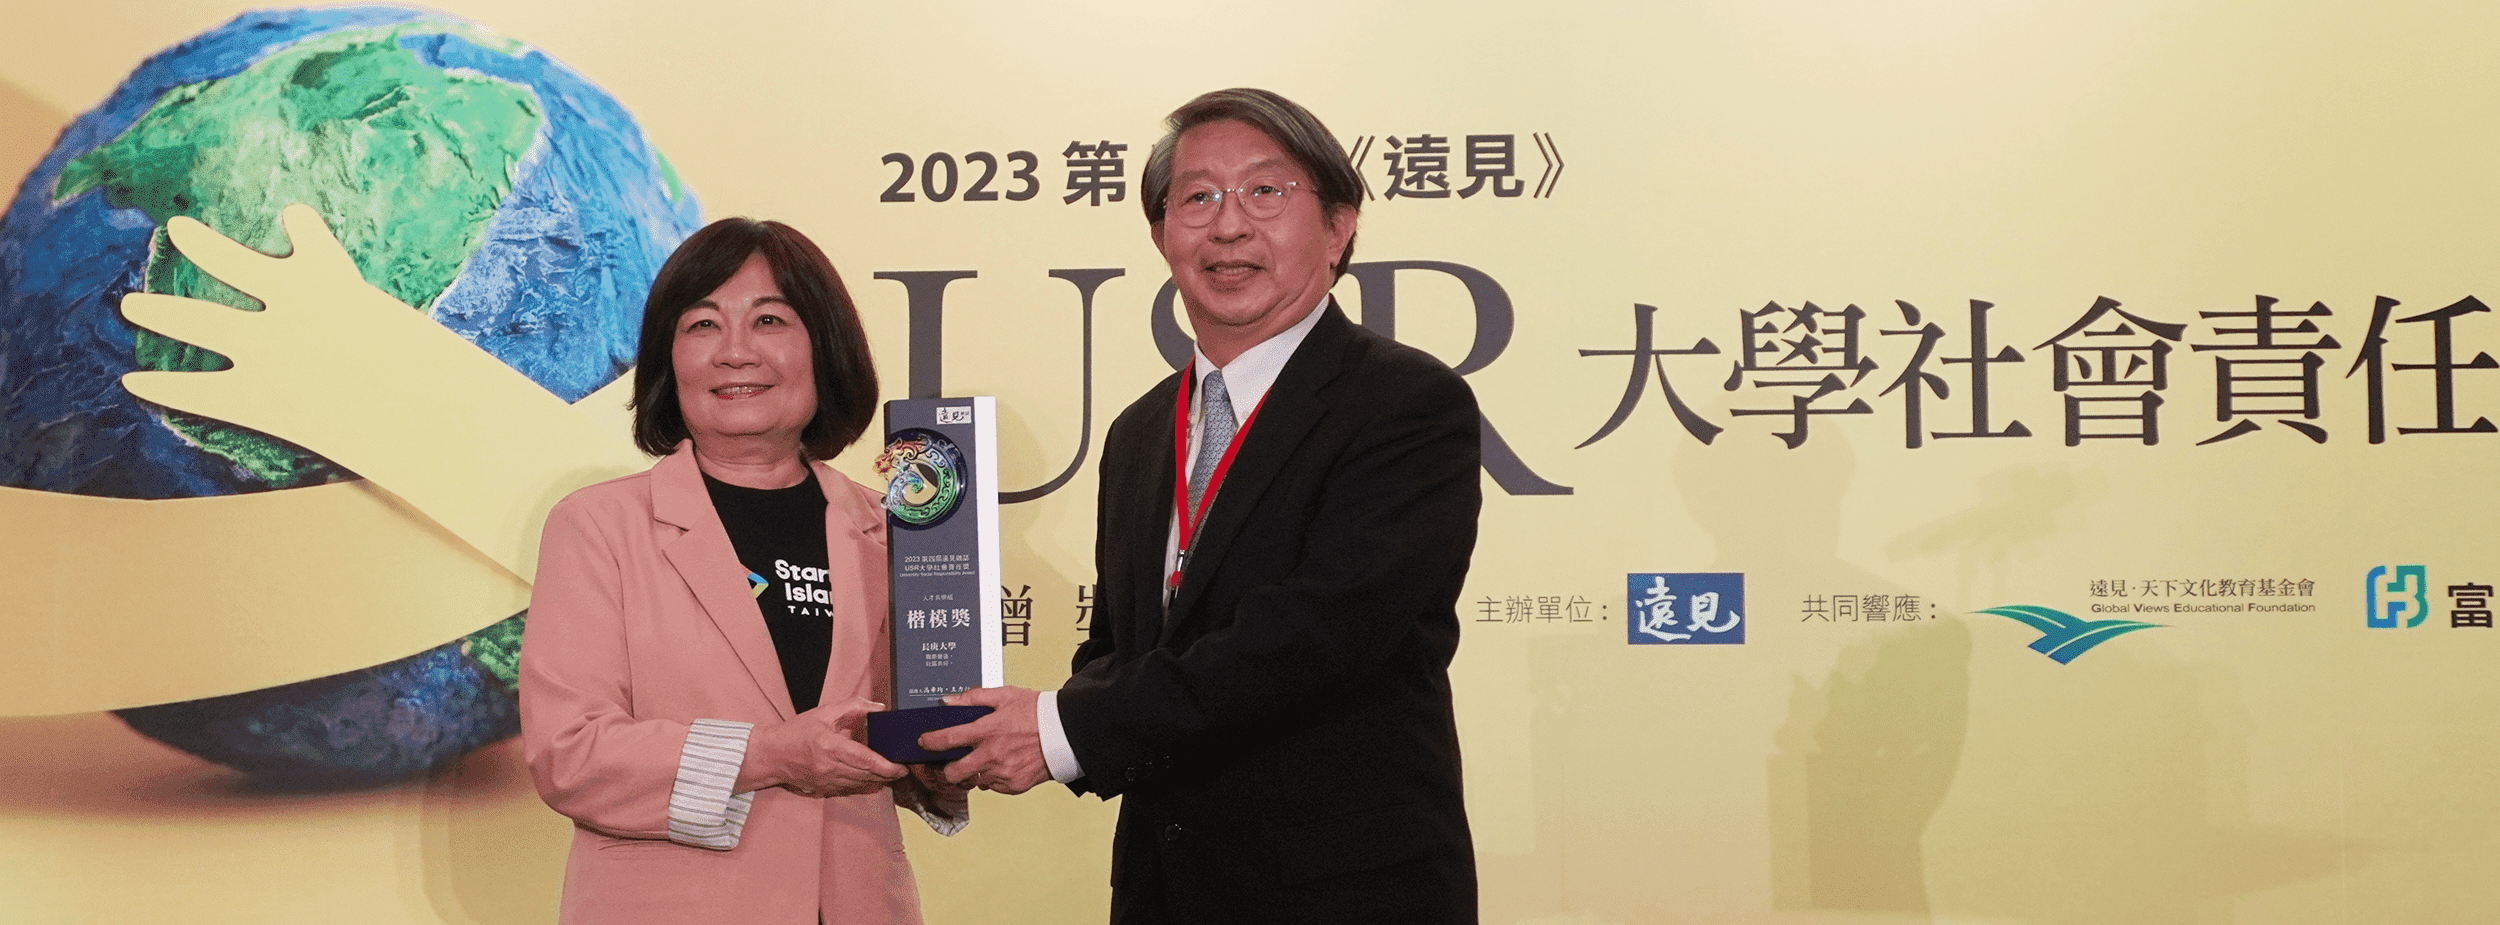 Chang Gung Memorial University wins the 2023 Vision USR Award for helping people with disabilities find employment